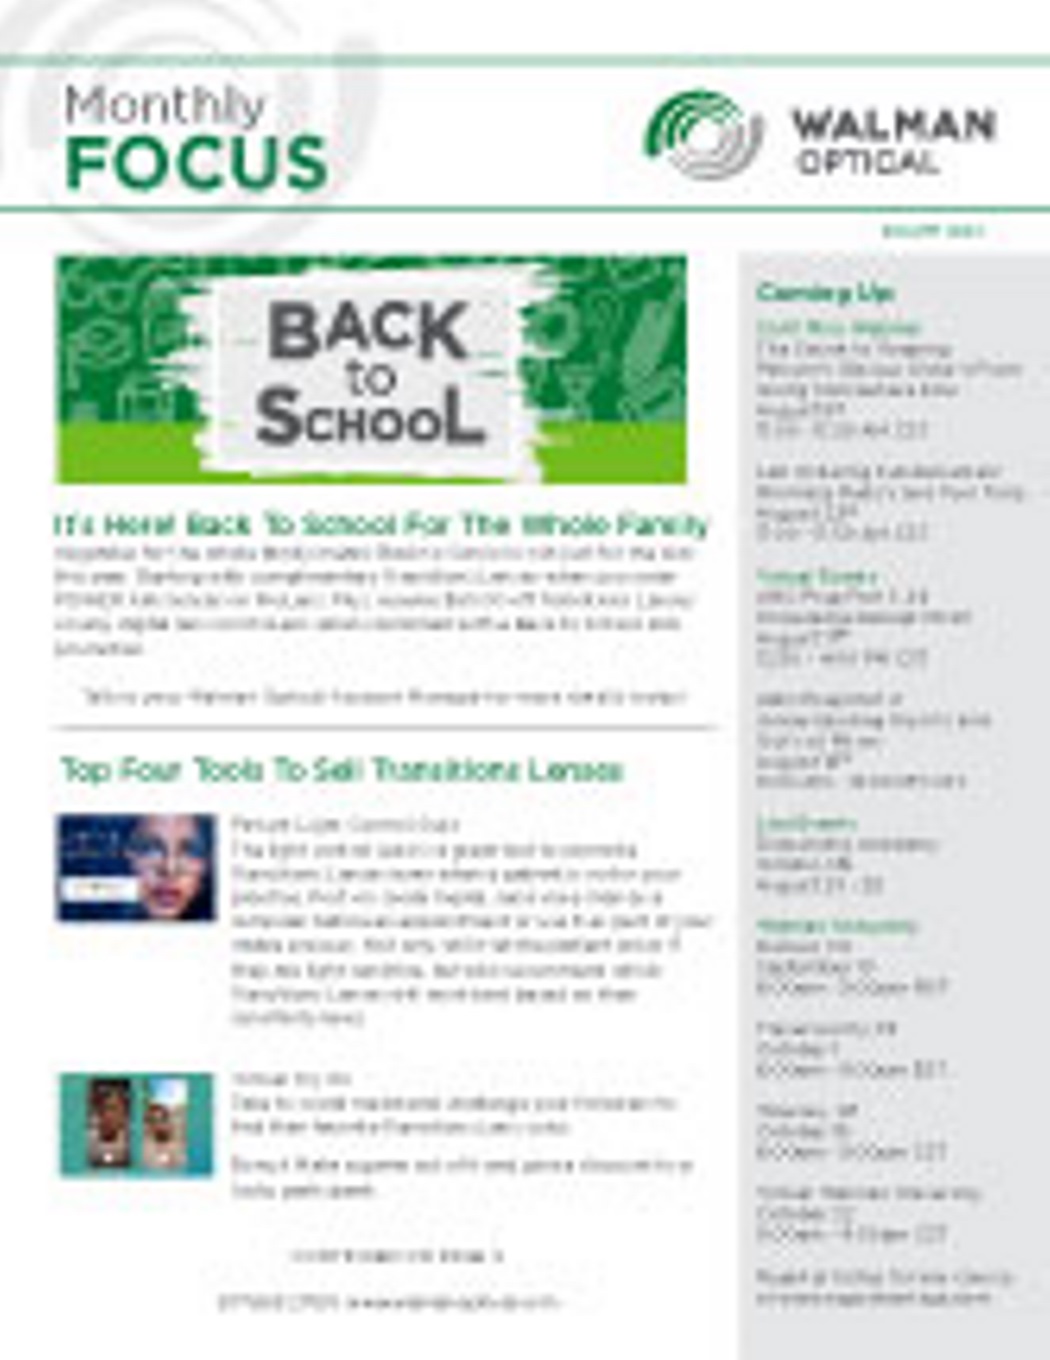 Monthly-Focus-Image